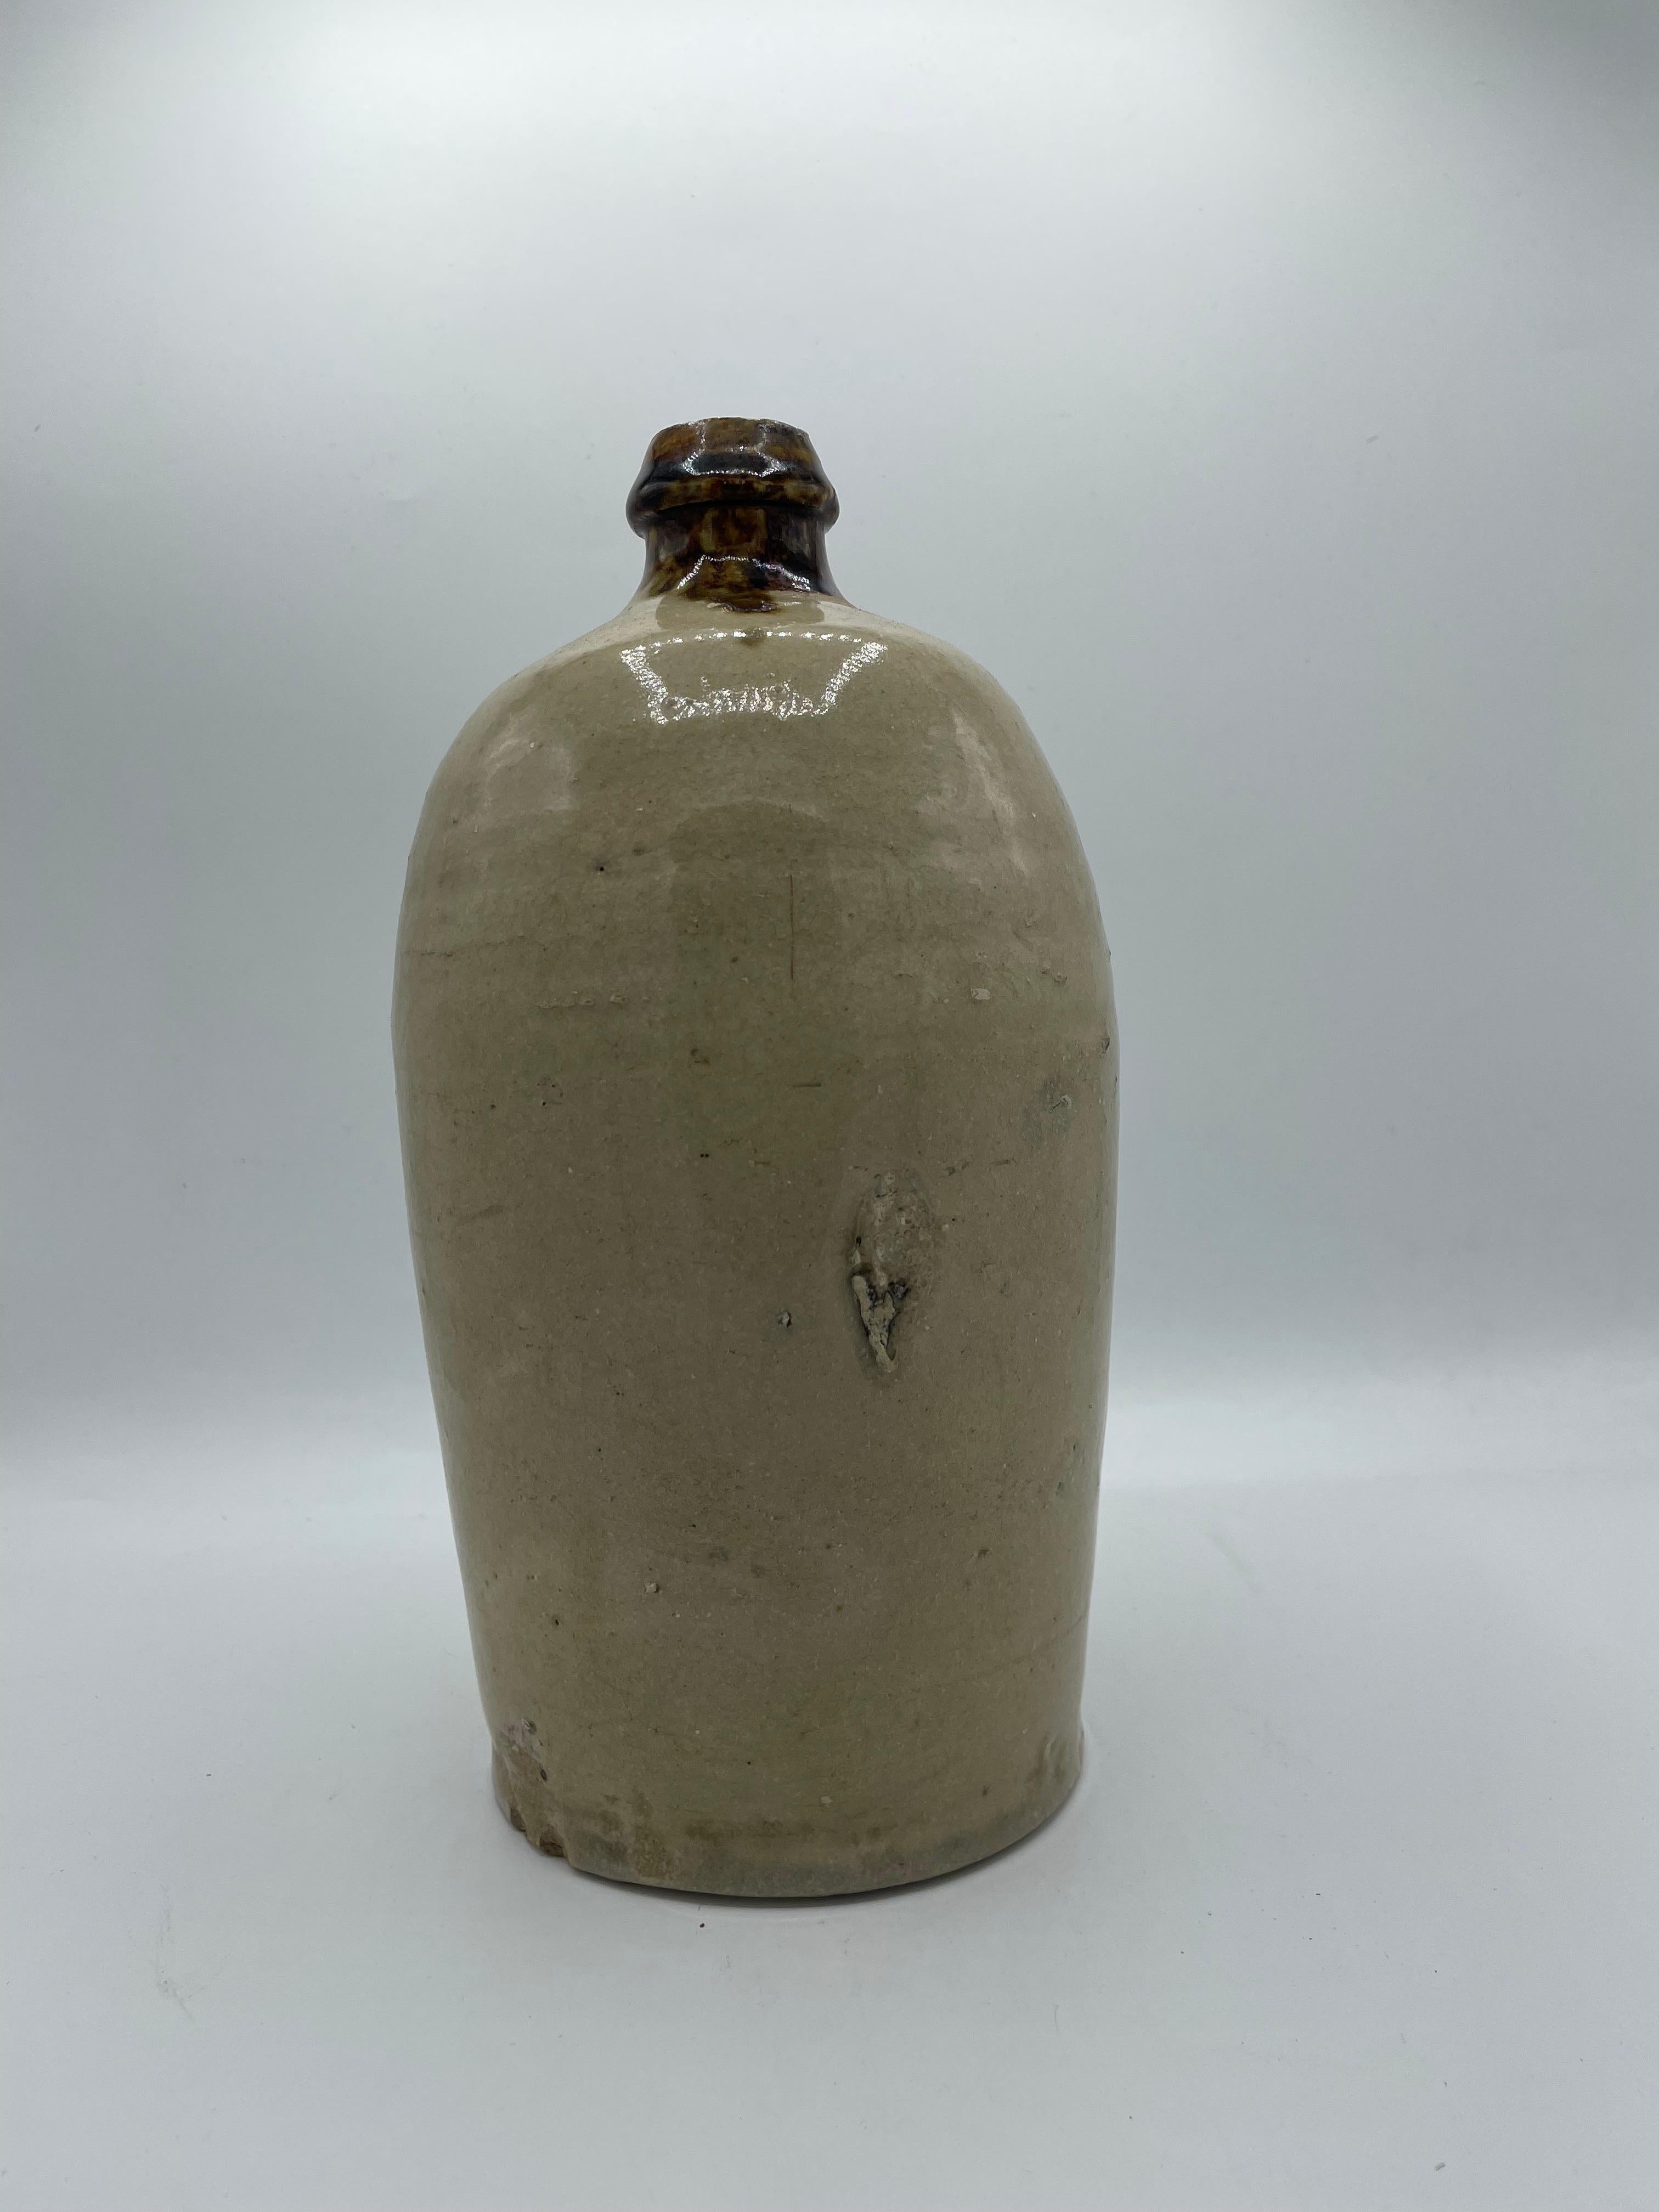 This is a bottle that the people were used to carry sake or soy sauce.
It is made with porcelain and it was made around 1960 in showa era. 
It can use as a flower vase or as a decoration.

Dimensions:
H25 x 14 x 14 cm